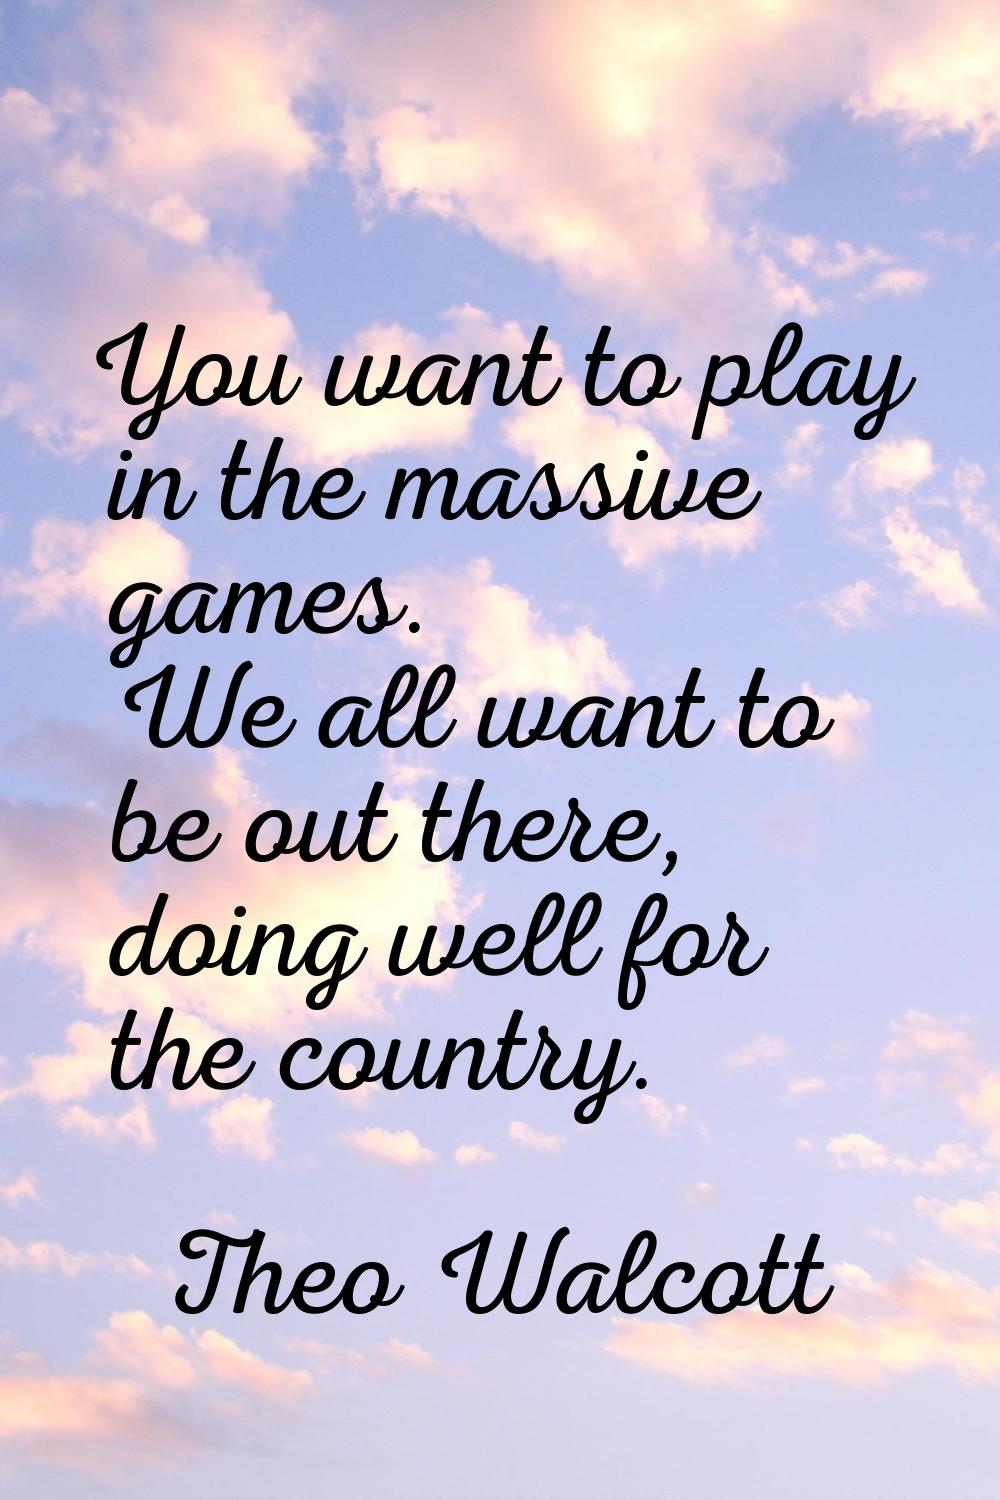 You want to play in the massive games. We all want to be out there, doing well for the country.